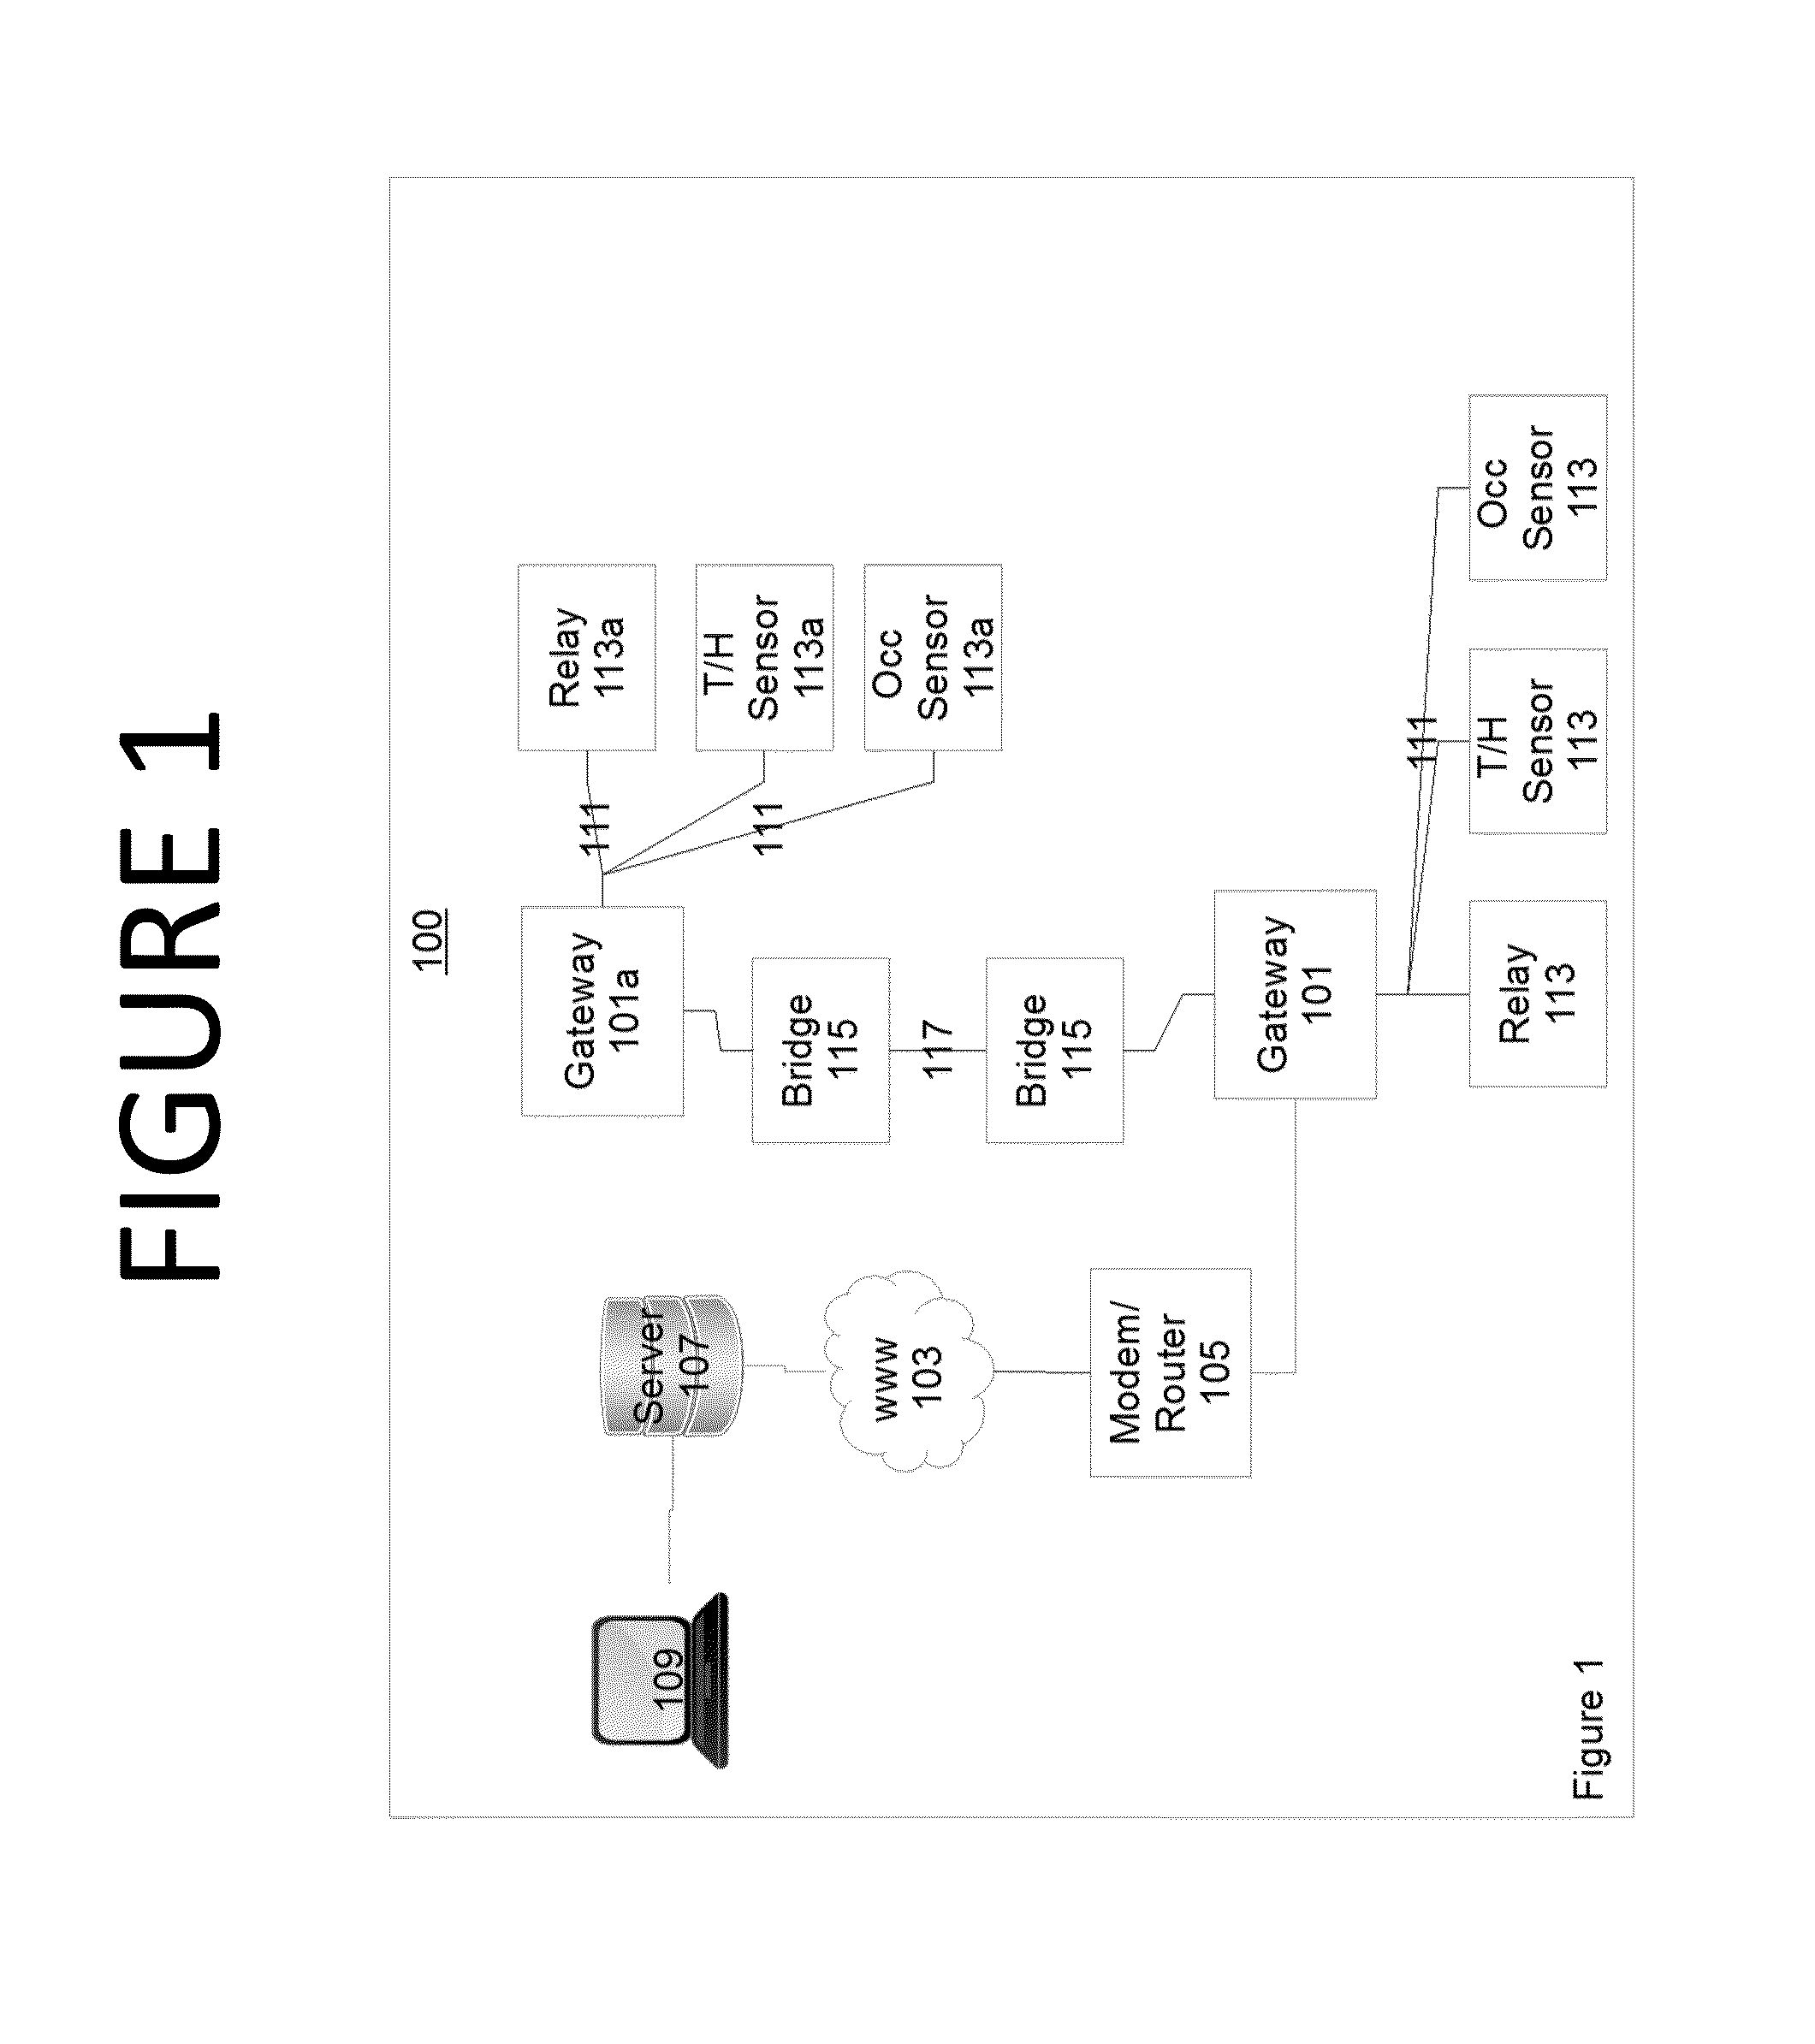 Method and system for powerline to meshed network for power meter infra-structure